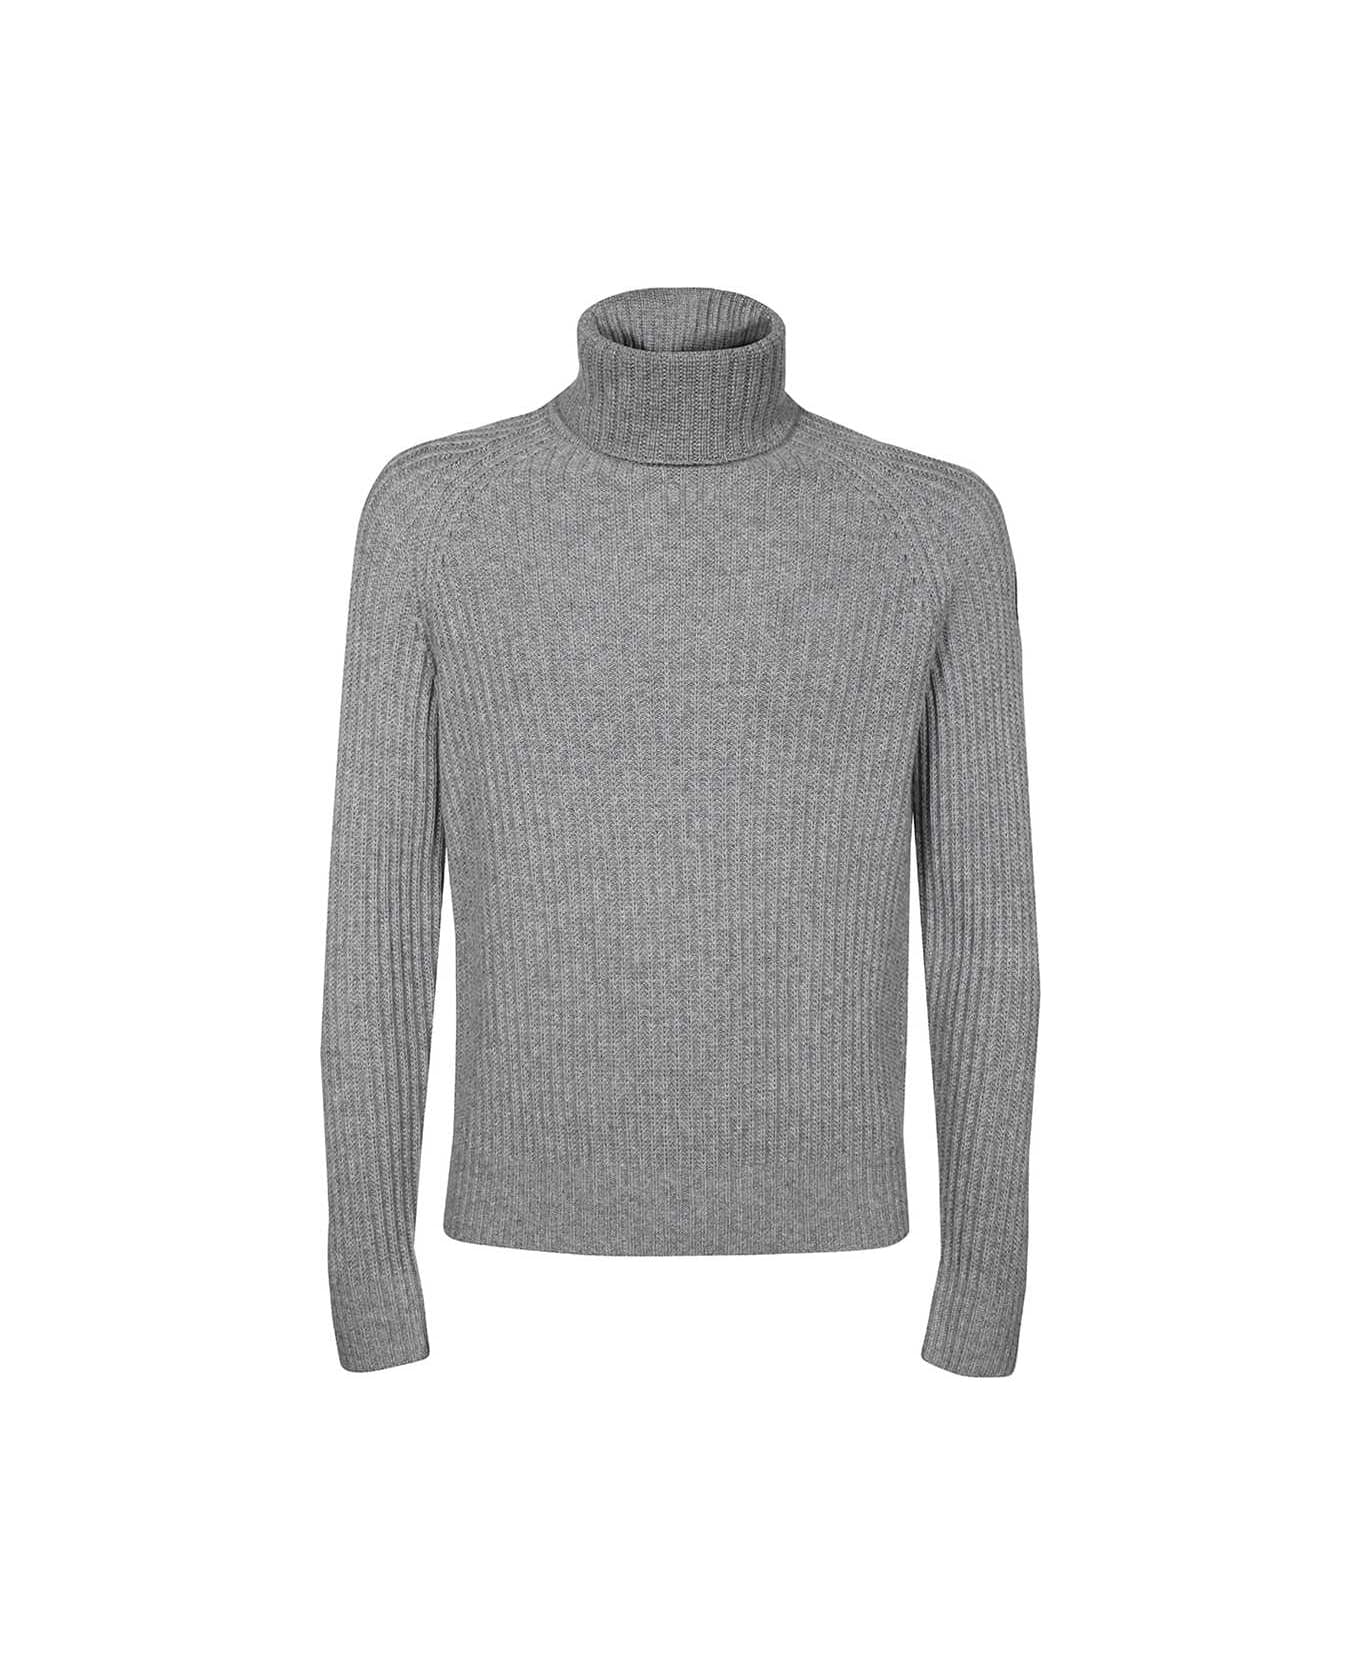 Parajumpers Wool Turtleneck Sweater - grey